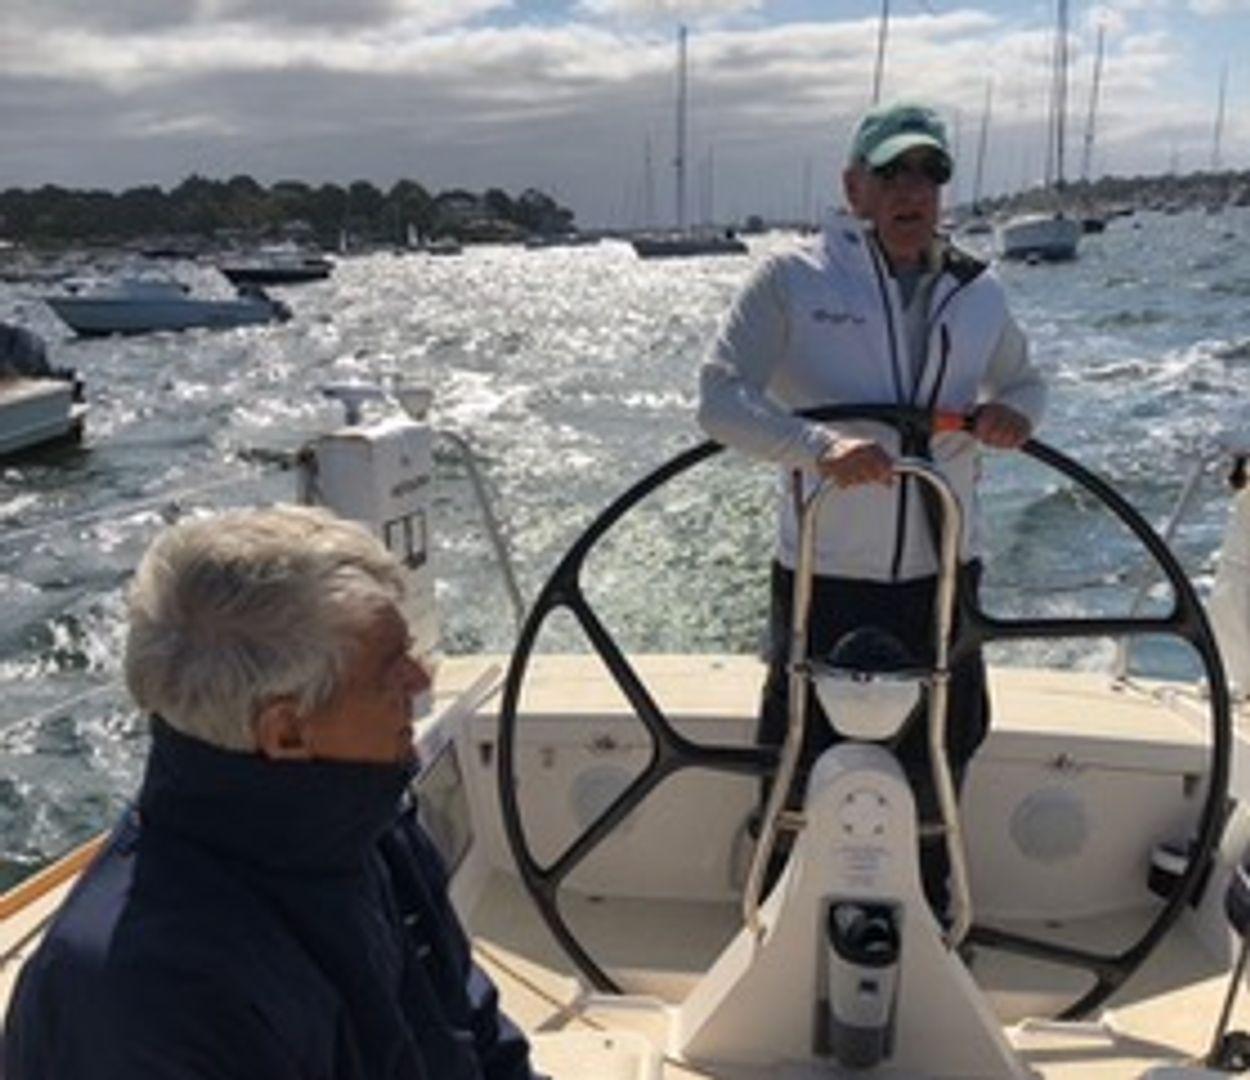 Heading out to watch the start of the J/70 Worlds in Marblehead, 2019, with designer Rod Johnstone.
